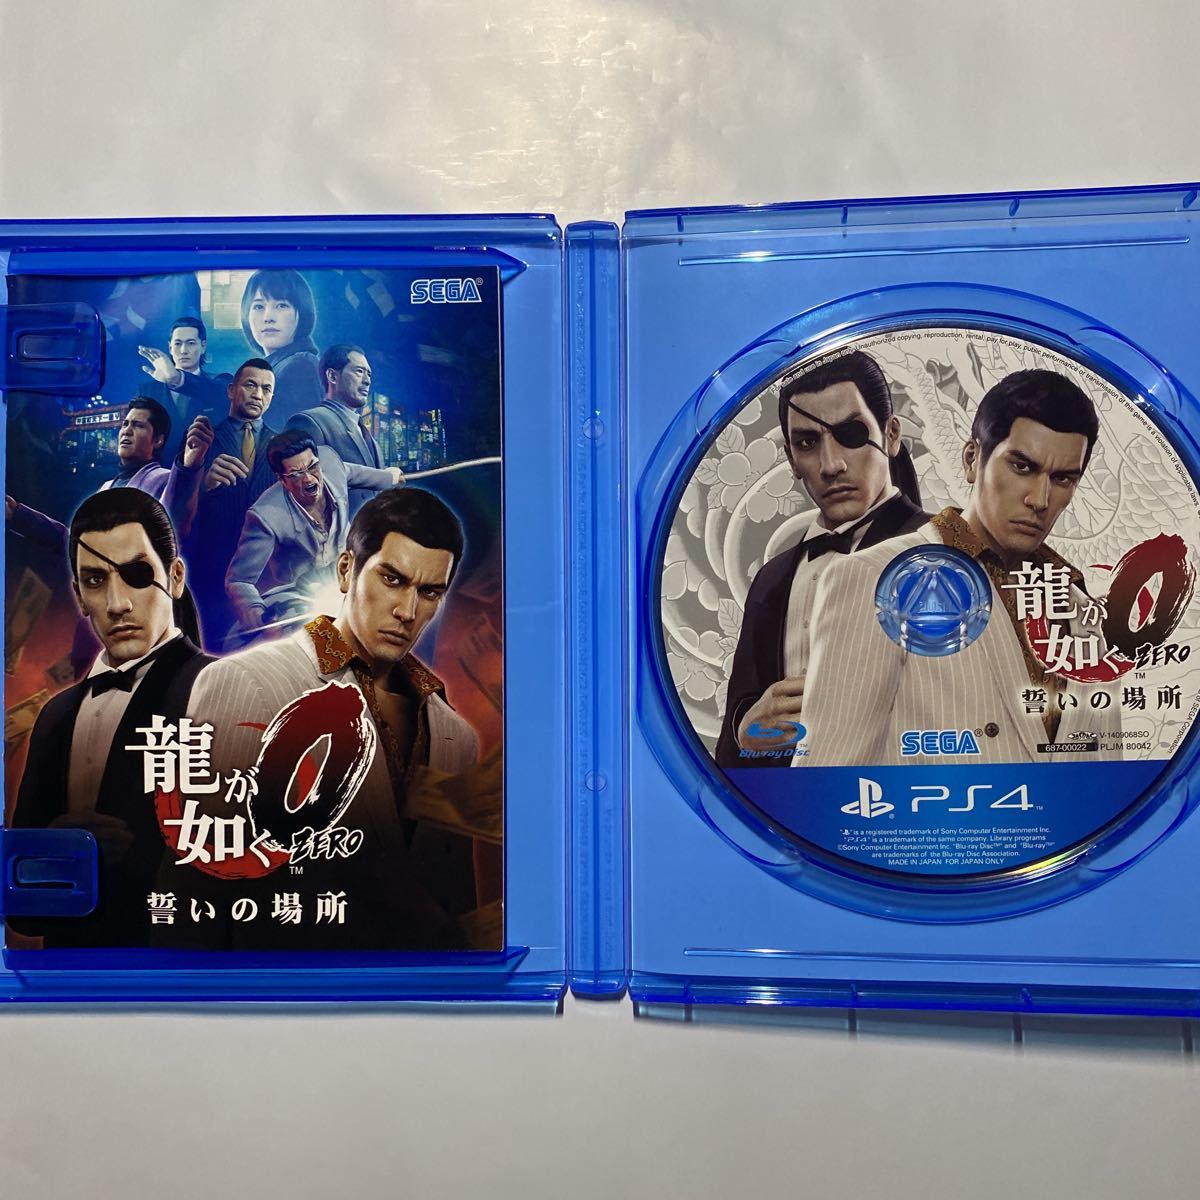 PS4 龍が如く 3本セット